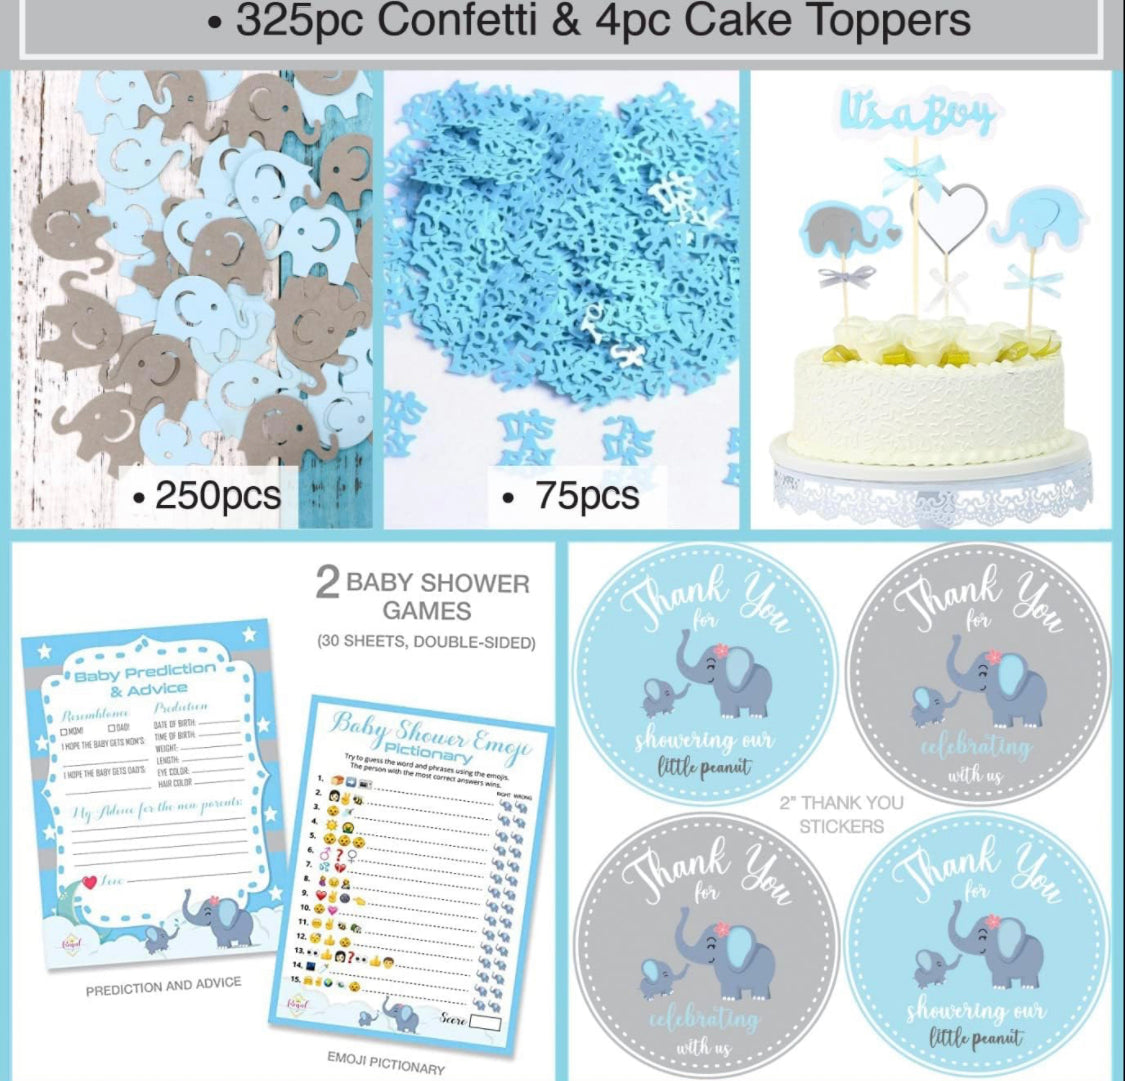 597 Piece Blue Elephant Baby Shower Decorations for Boy Kit